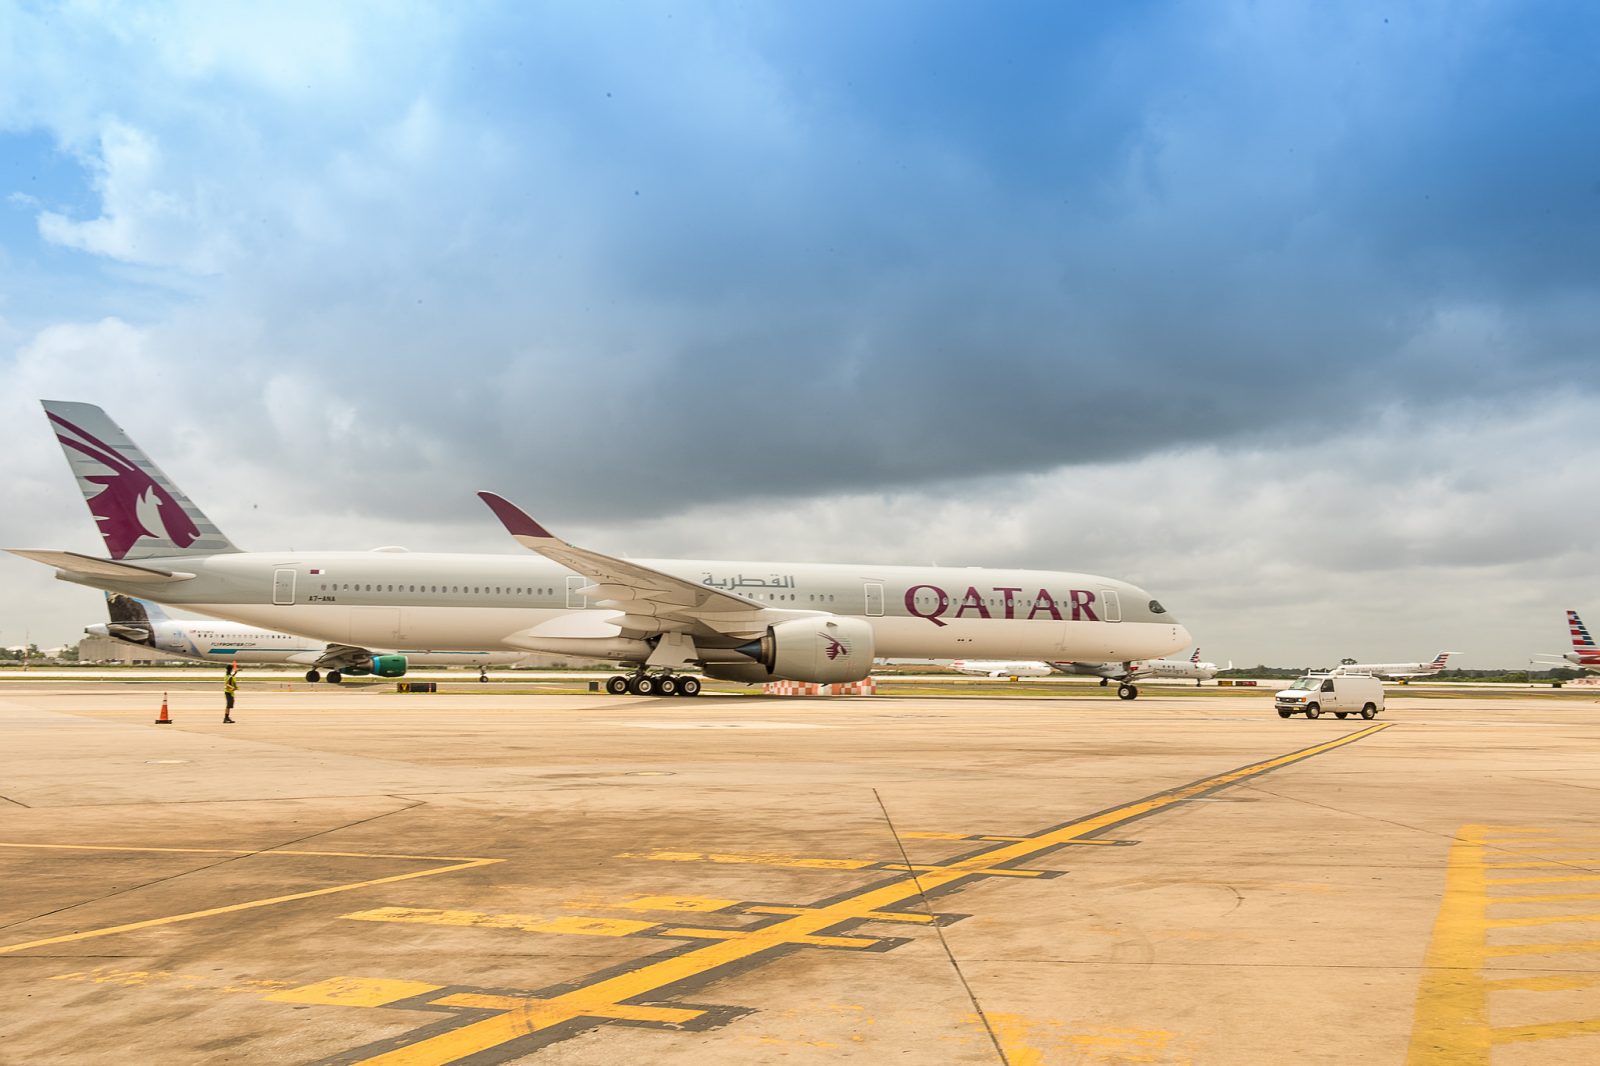 Qatar Airways Will Release 2017 Financials in Two Weeks Time: Still Wants to Invest in India